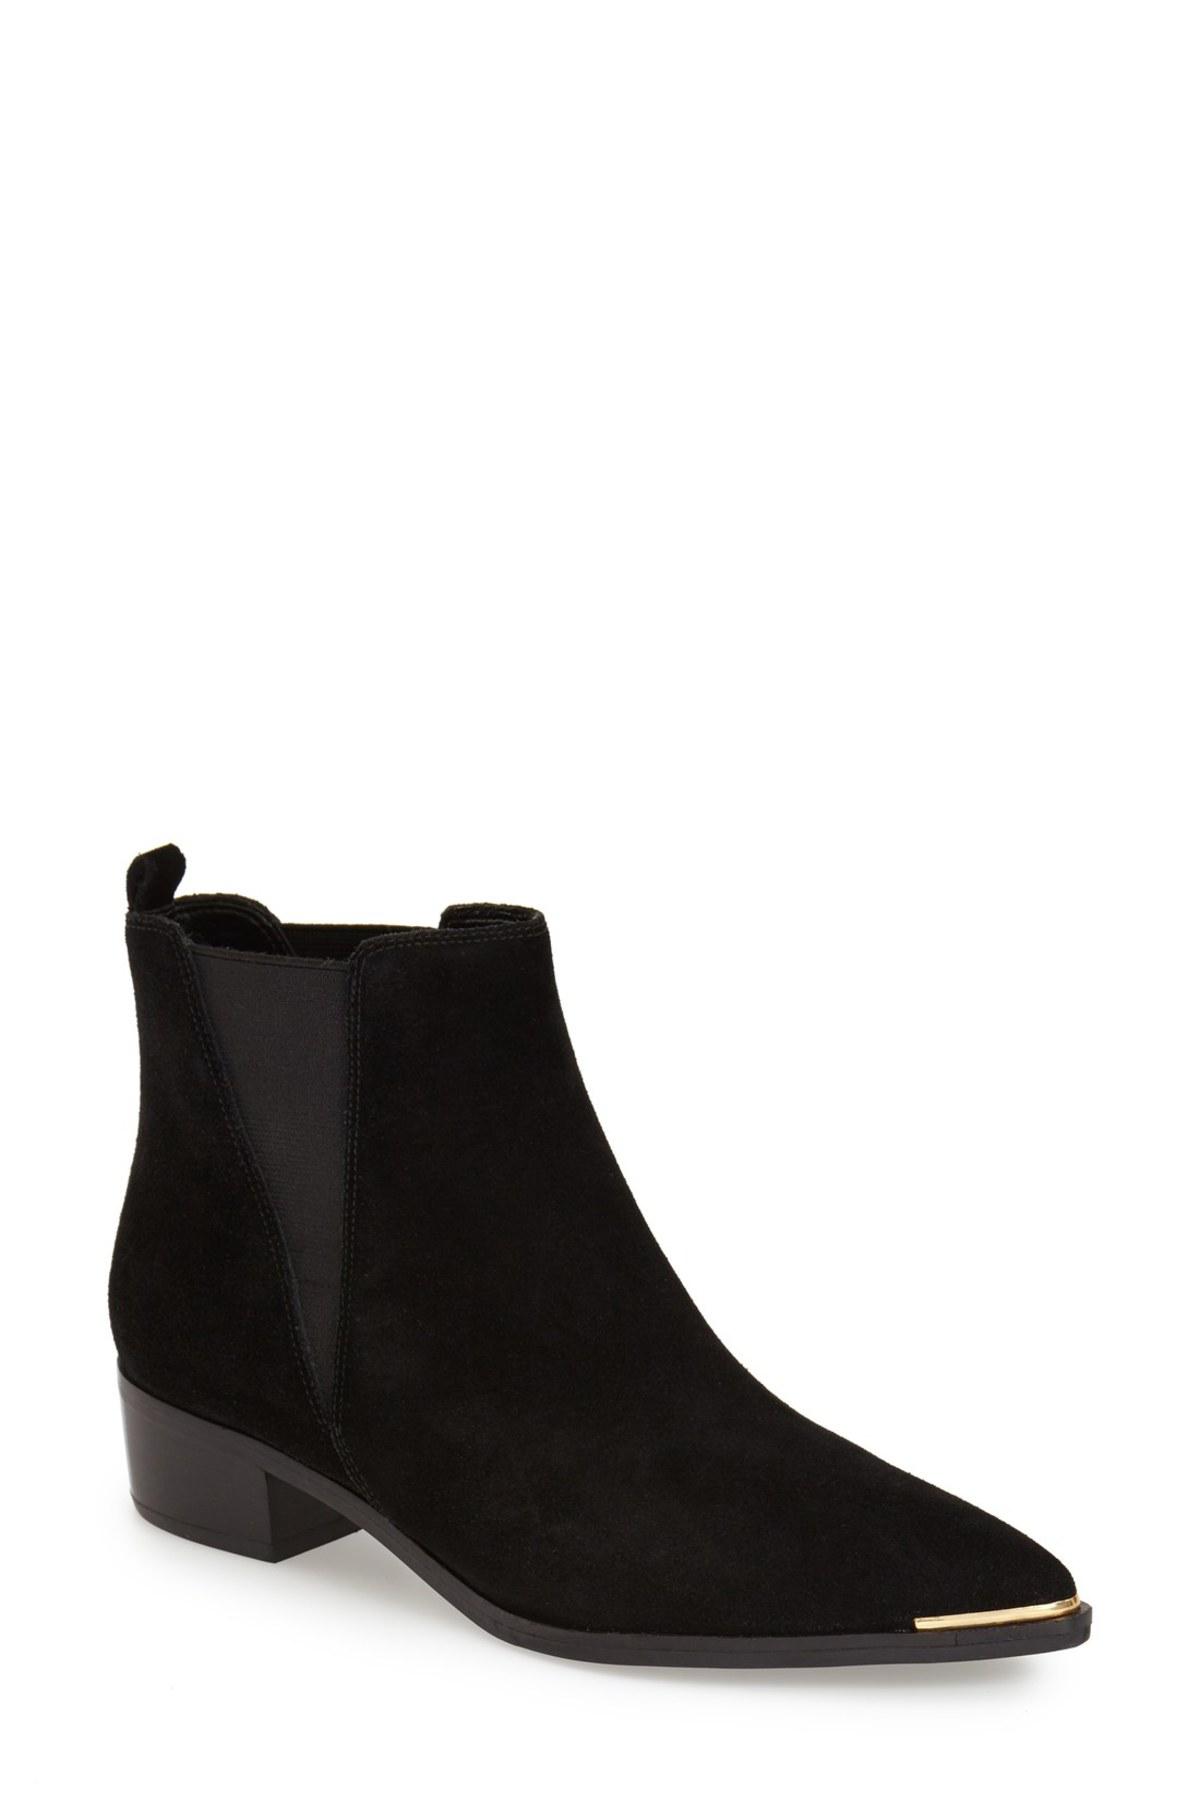 Lyst - Marc Fisher Yale Suede Chelsea Boots in Black